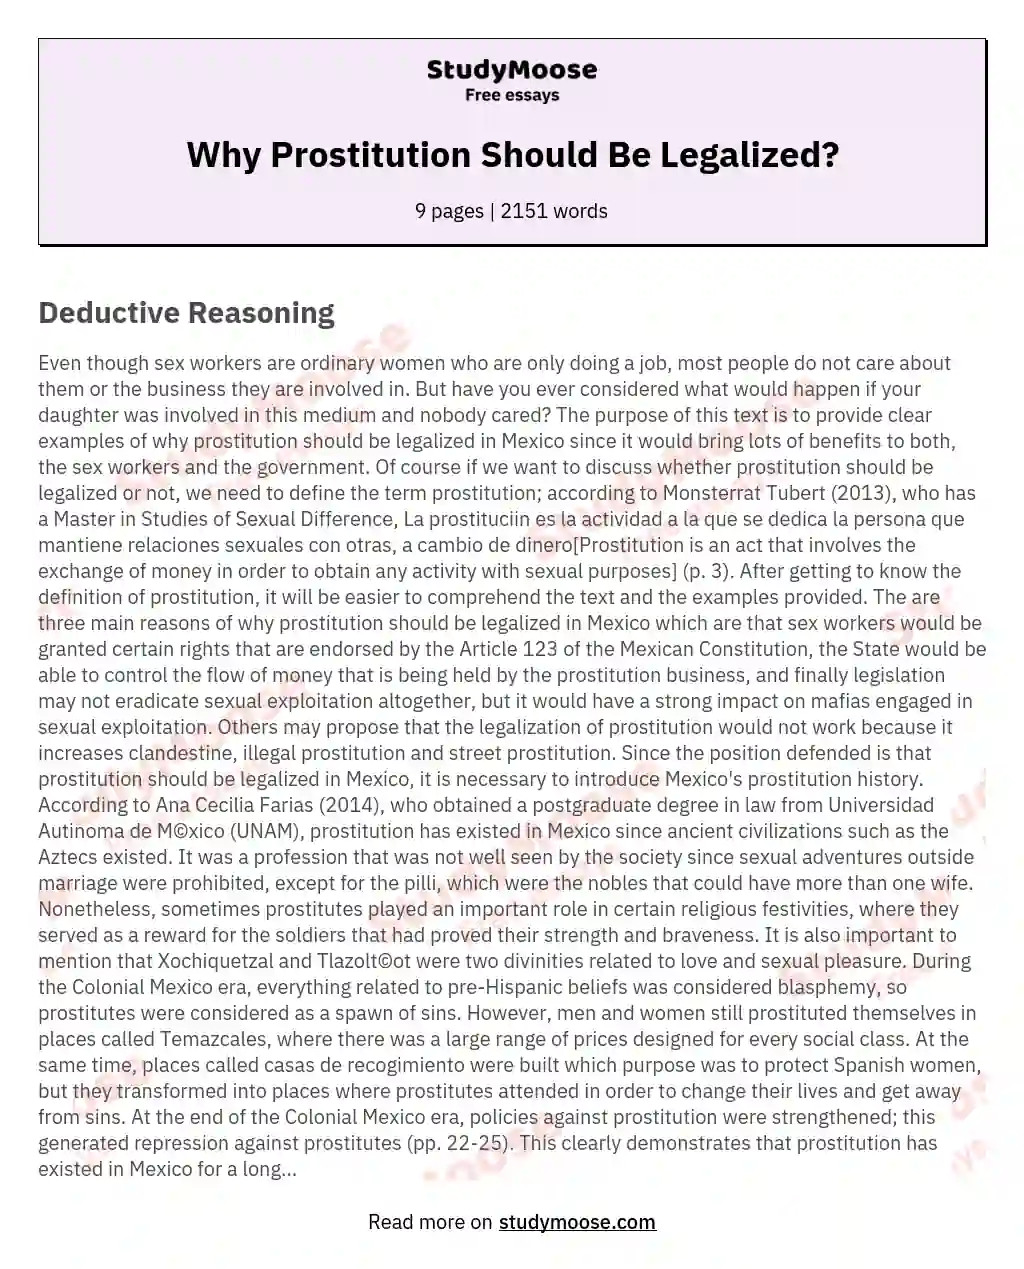 Why Prostitution Should Be Legalized? essay